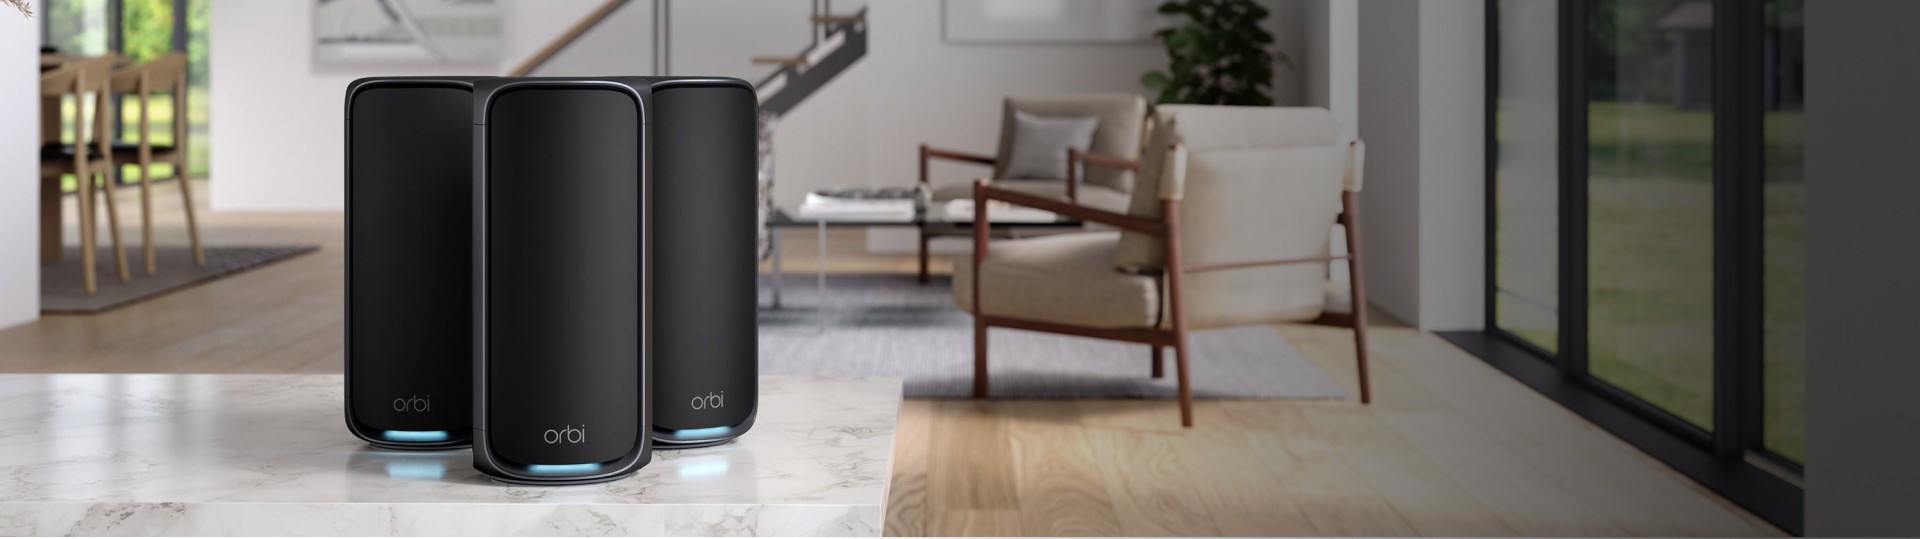 The Latest Smart Home Network Products & Technology | NETGEAR